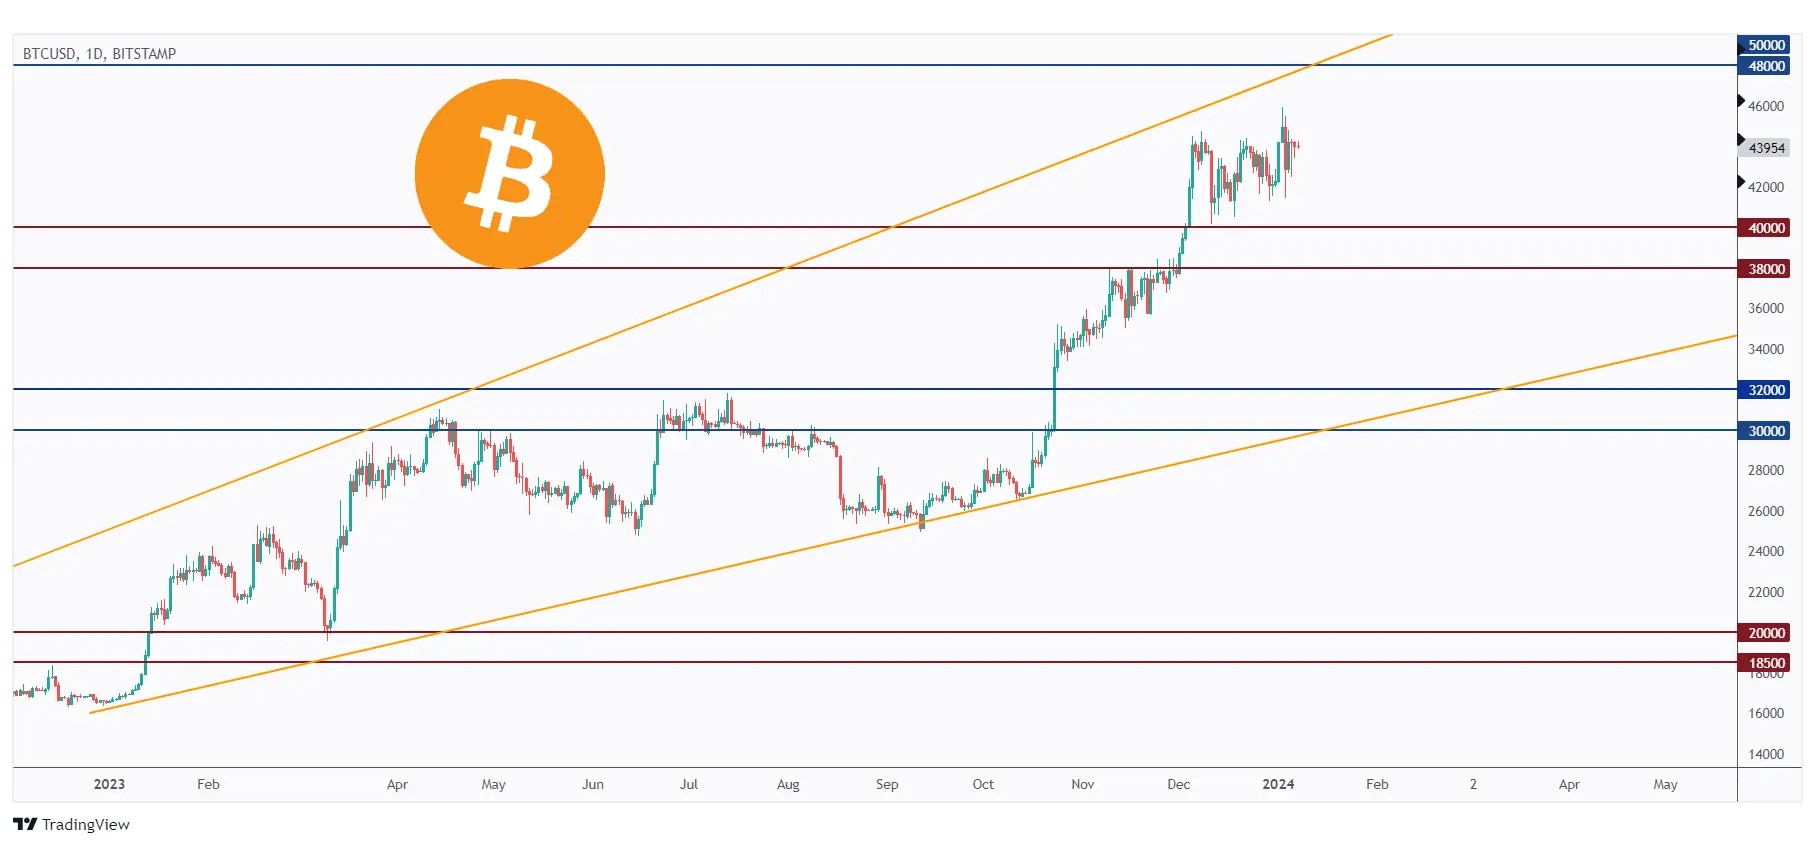 bitcoin weekly chart showing the bullish trend persists.